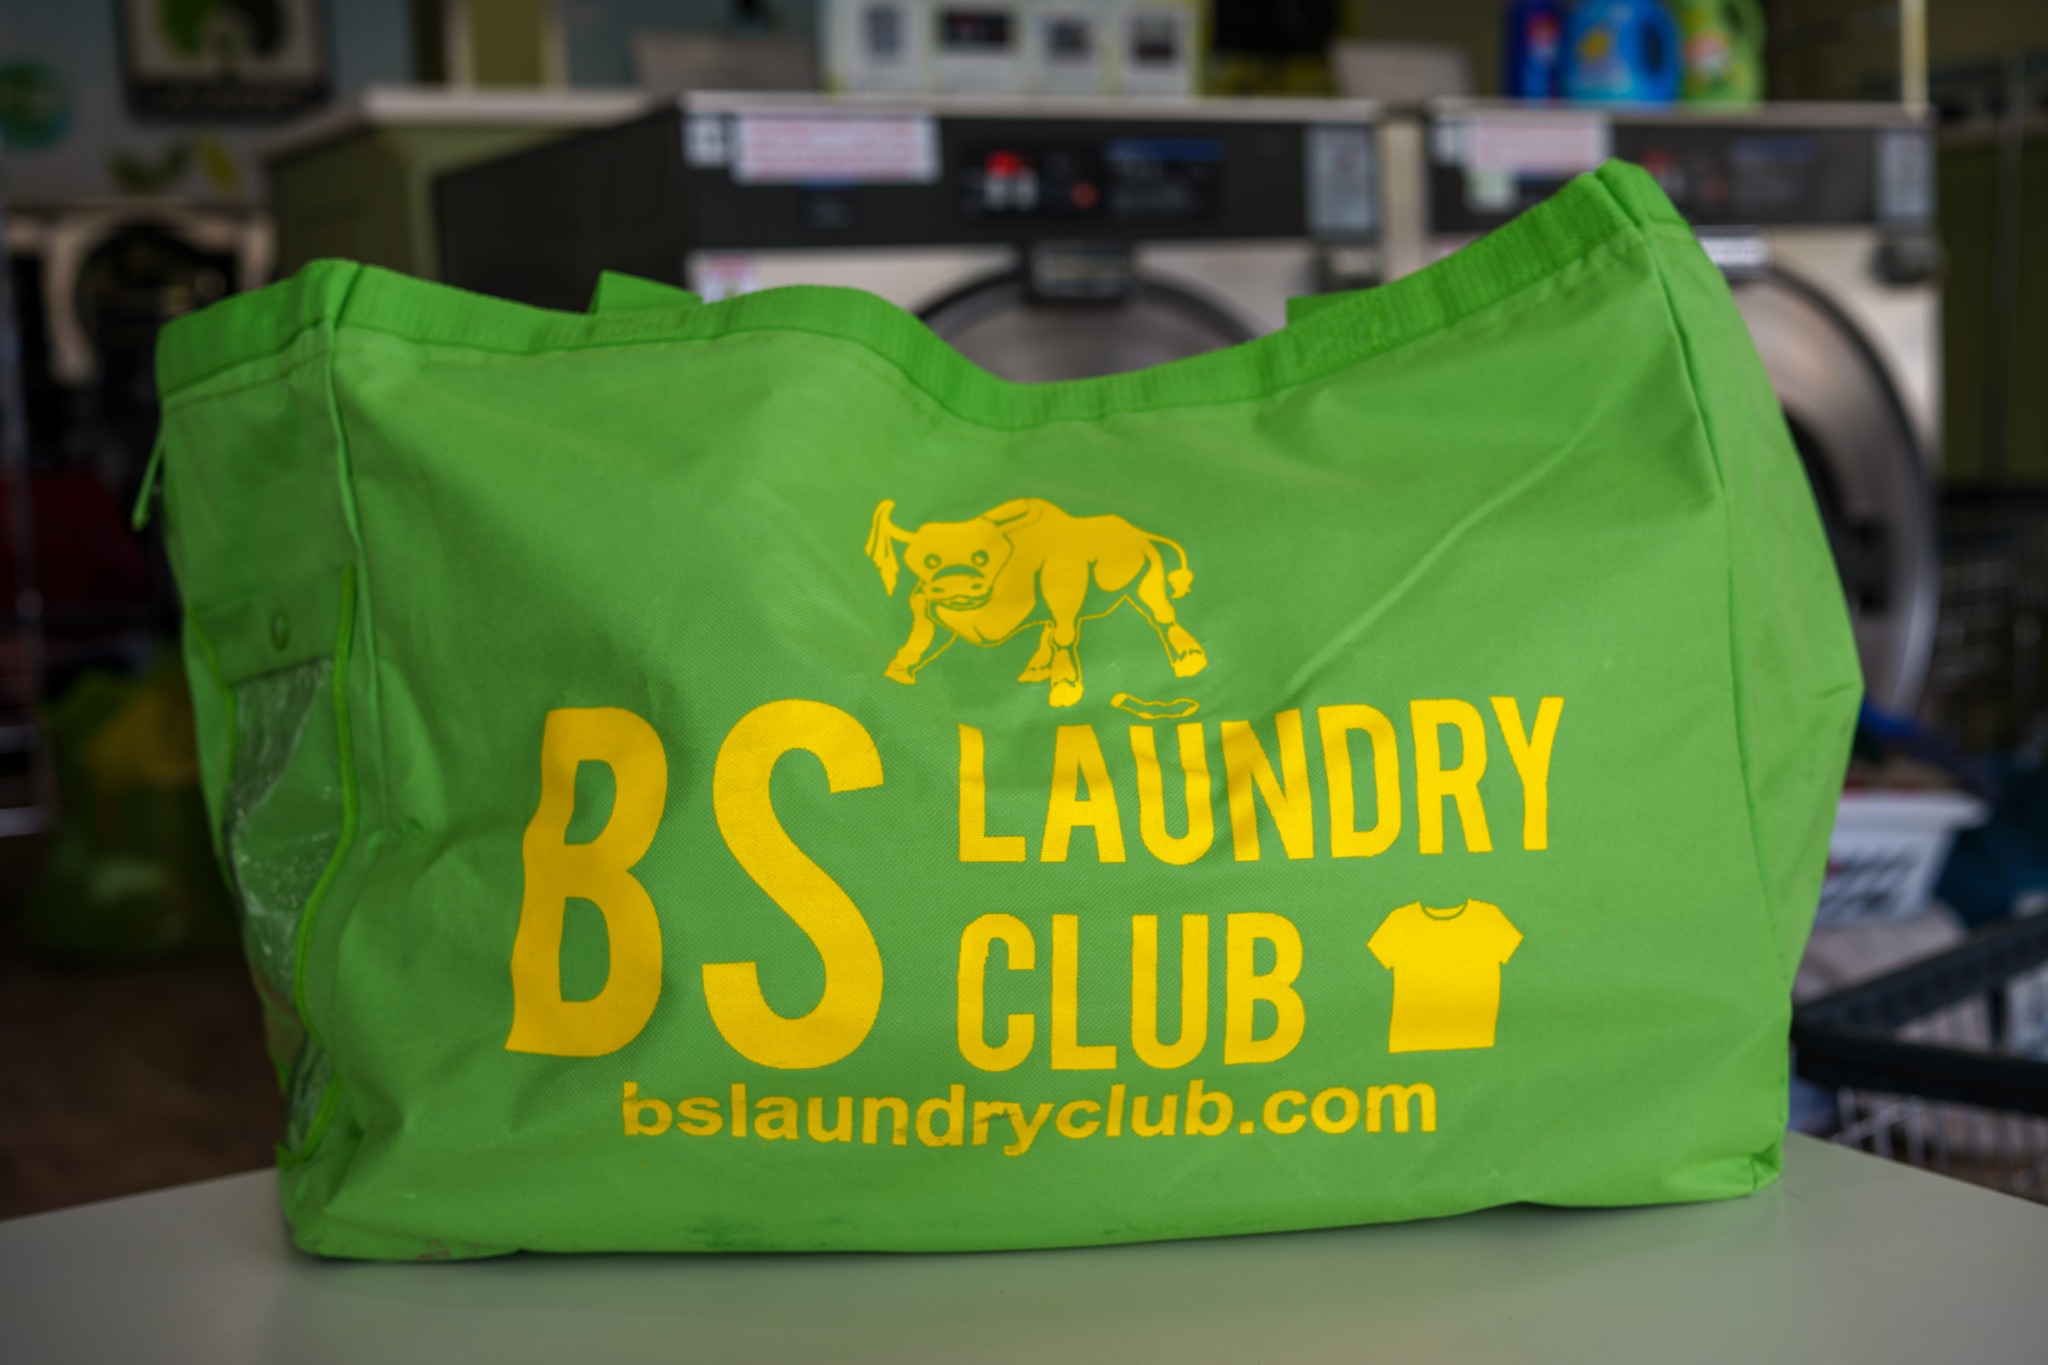 Image of green bag with yellow lettering reading "BS Laundry Club bslaundryclub.com" with bull and t-shirt icons also on bag